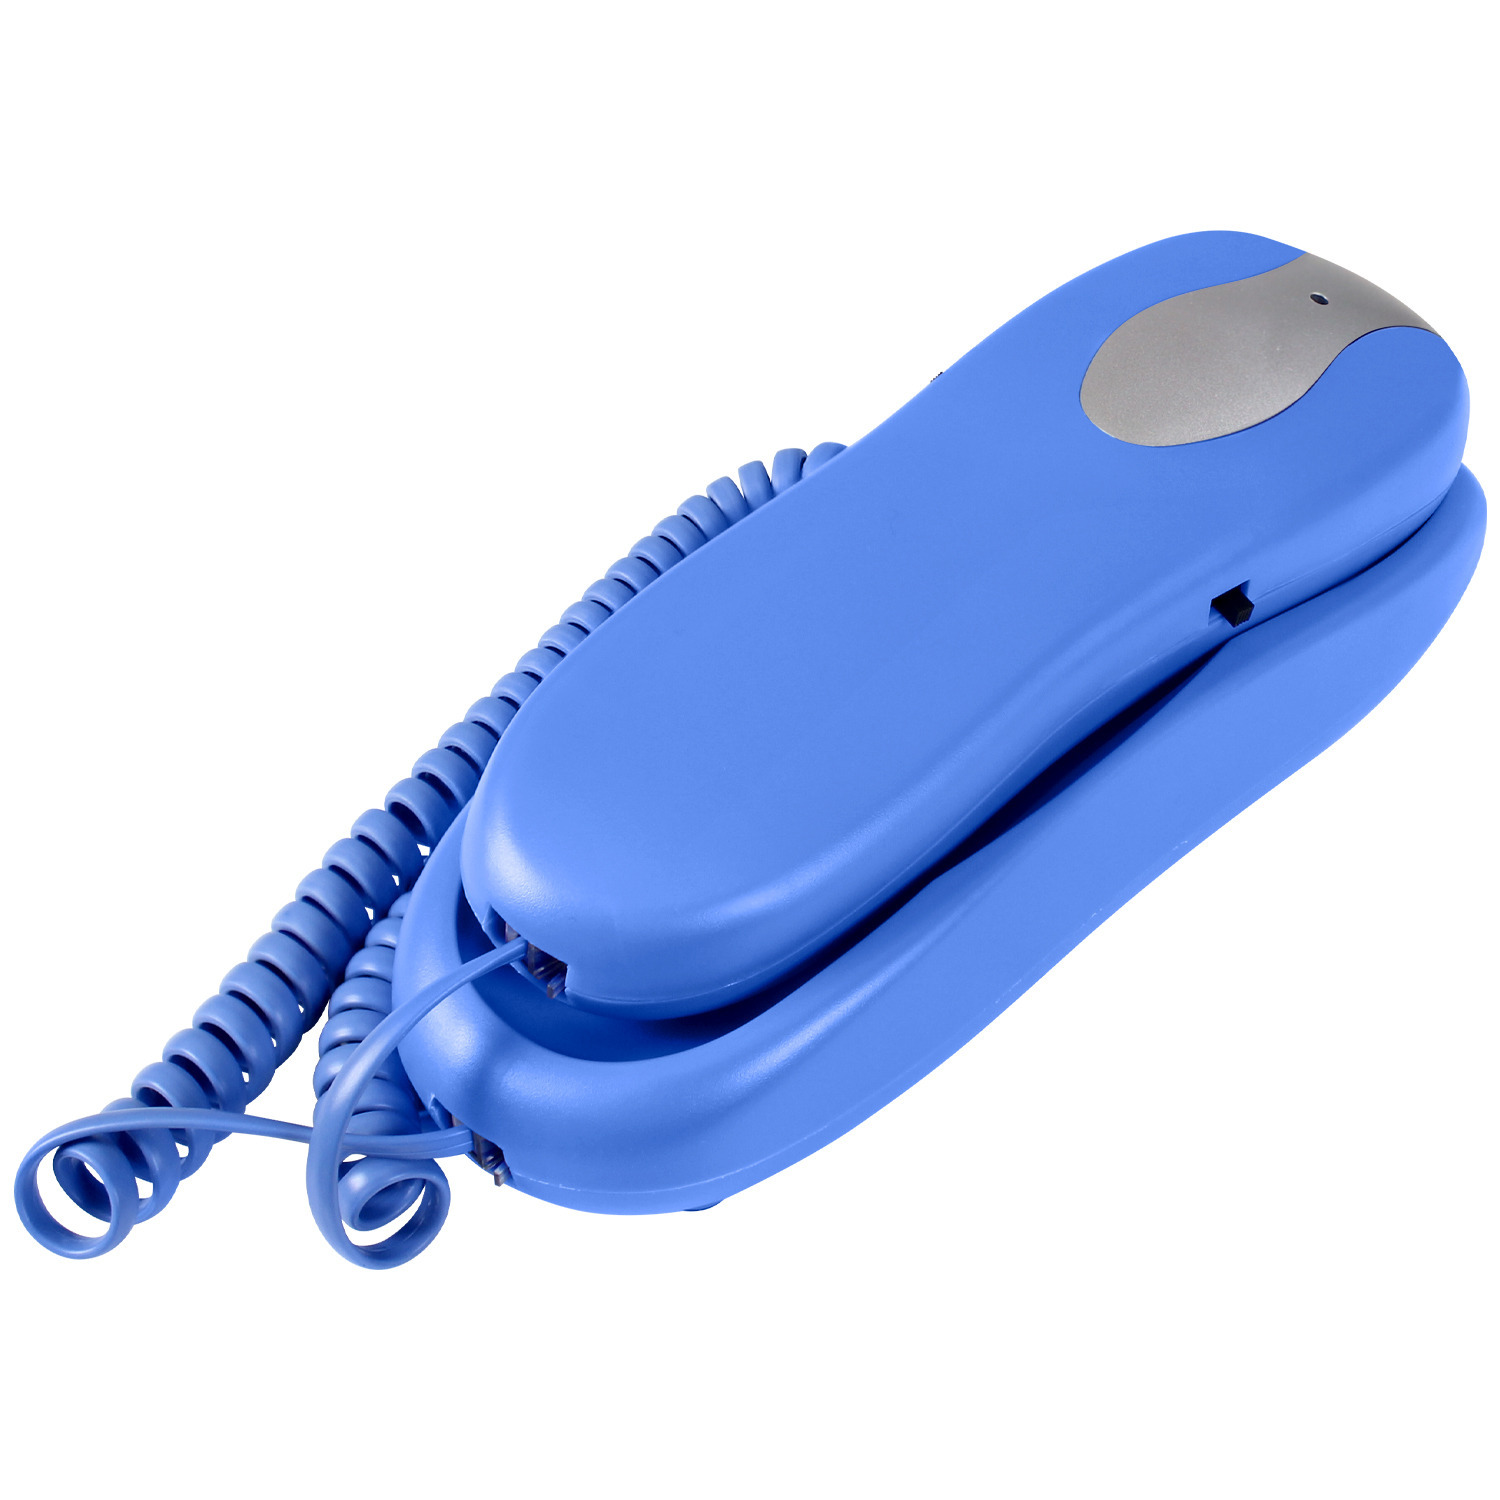 Slimline Blue Colored Phone For Wall Or Desk With Memory